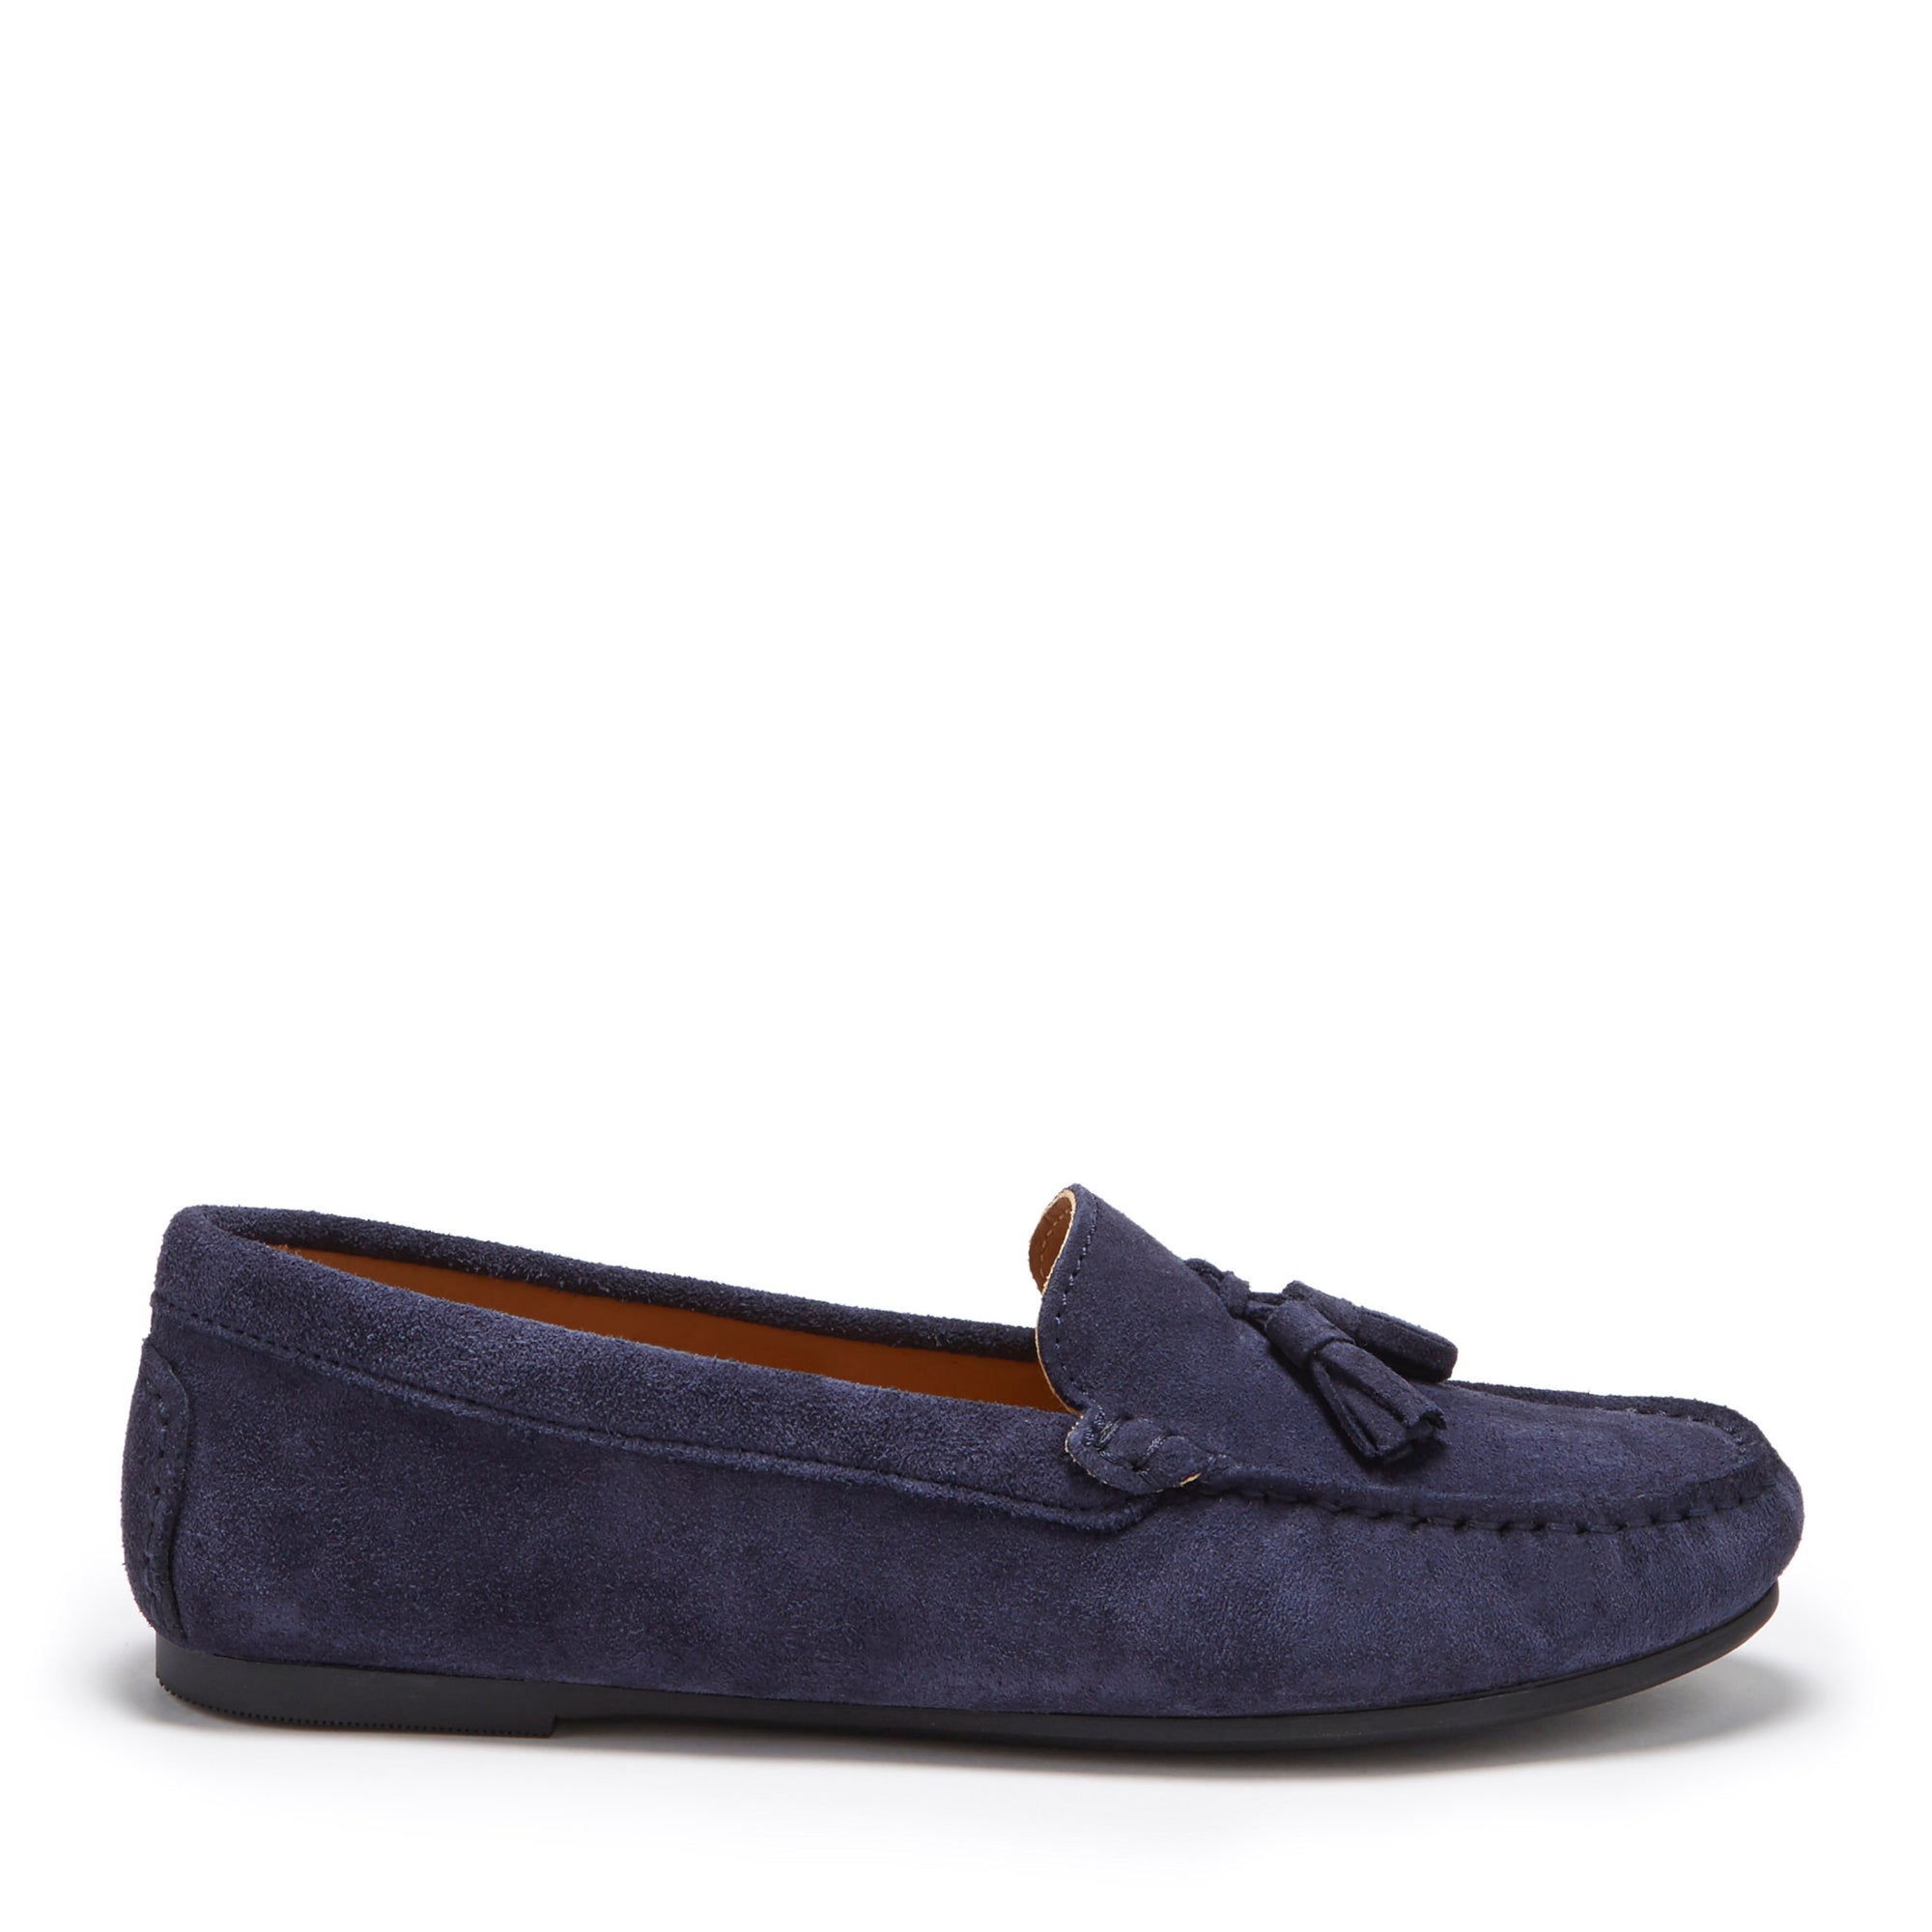 navy blue suede loafers womens